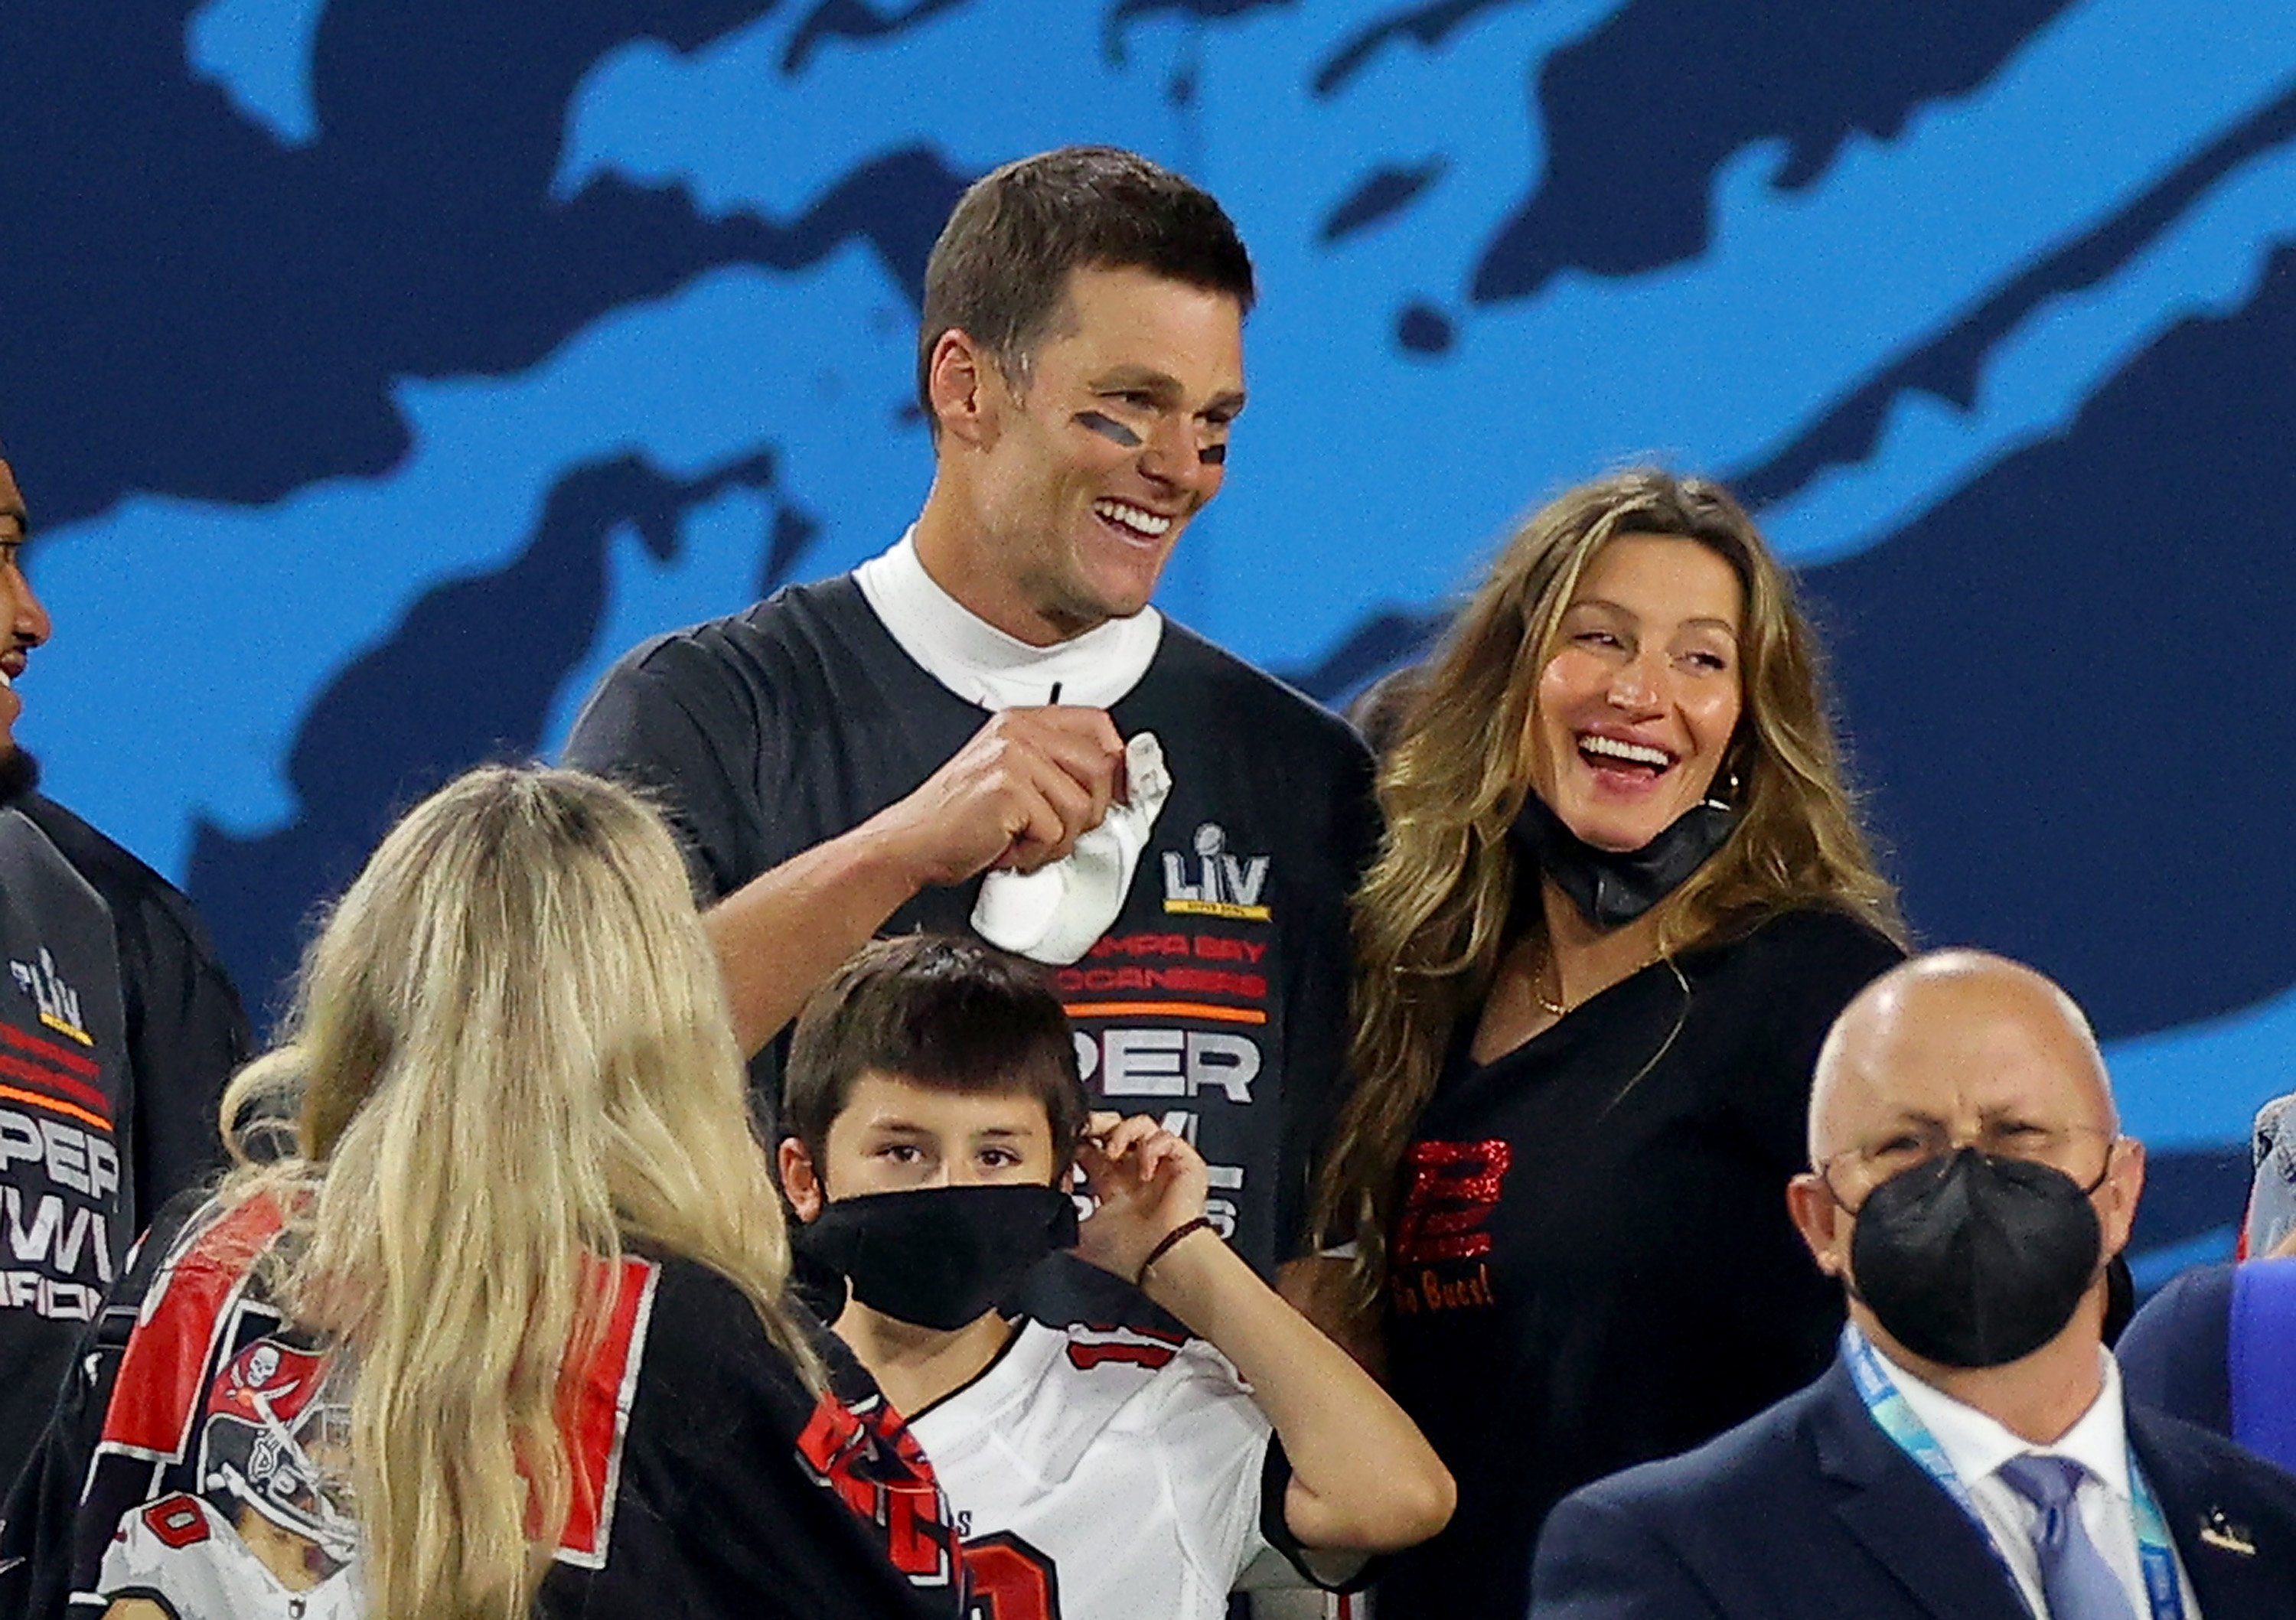 om Brady #12 of the Tampa Bay Buccaneers celebrates with Gisele Bundchen after winning Super Bowl LV 